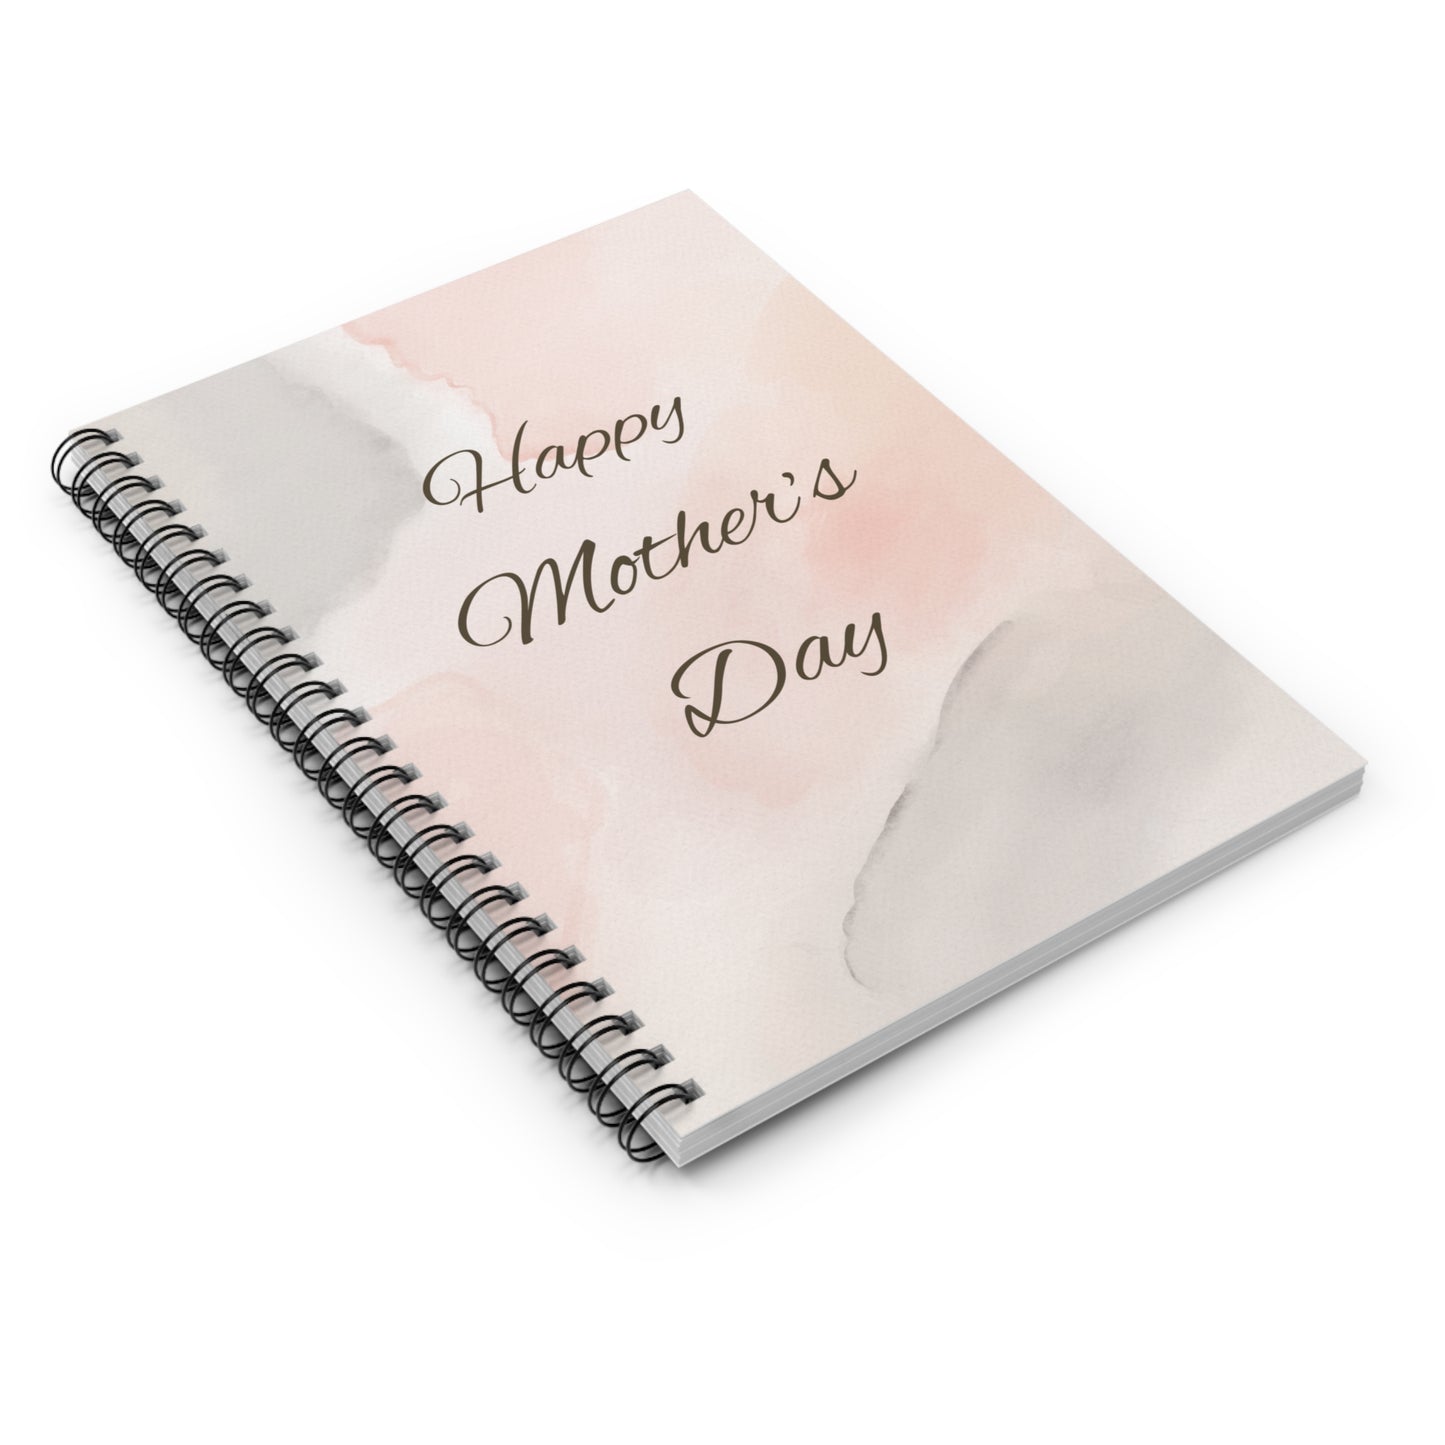 Happy Mother's Day Spiral Notebook - Ruled Line